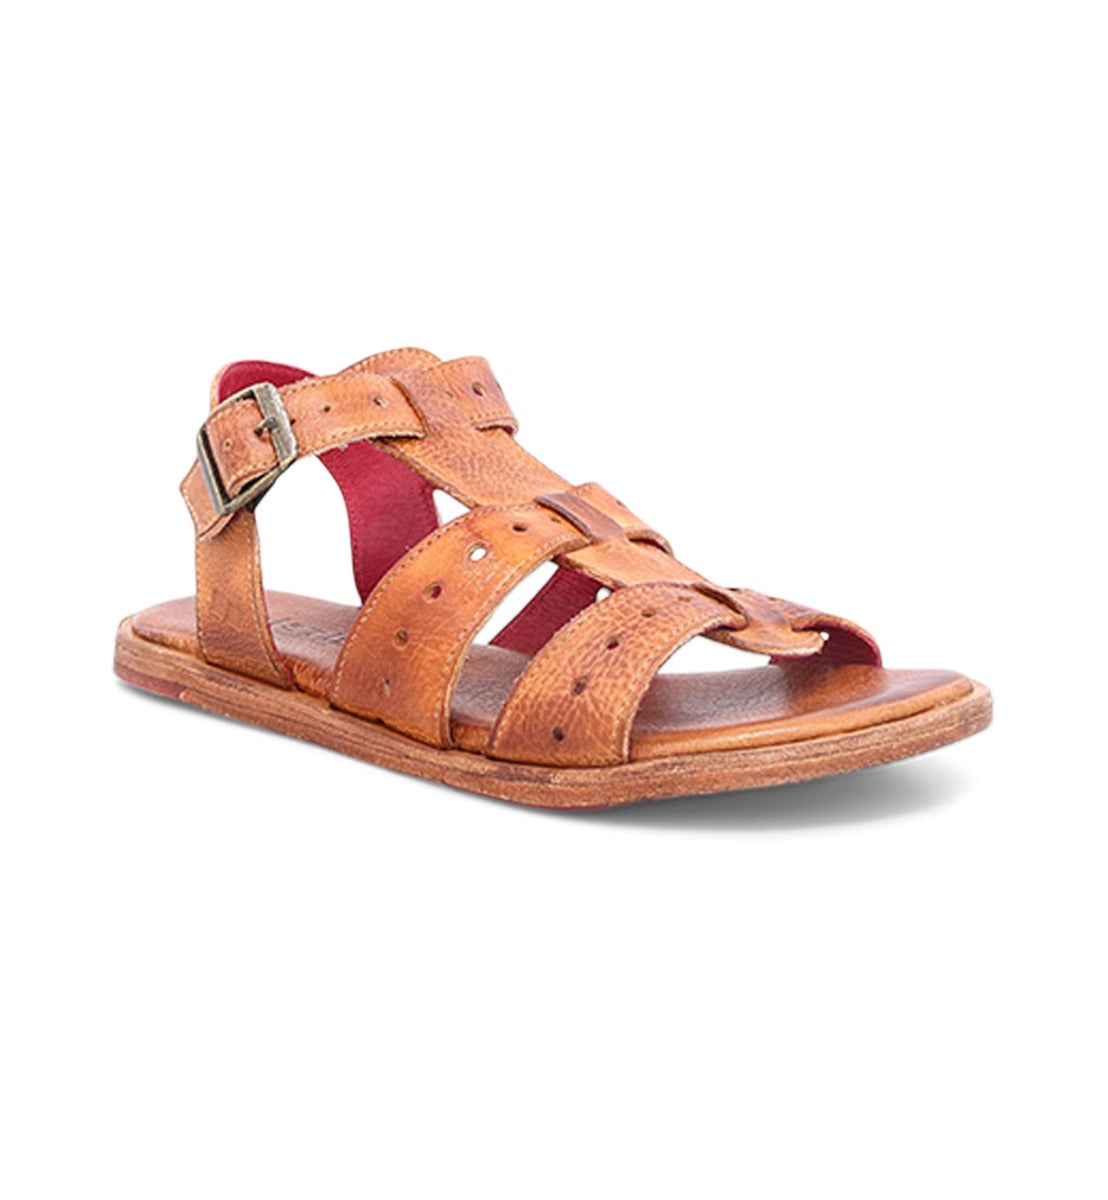 A pair of tan Sue sandals with straps and buckles. (Brand: Bed Stu)